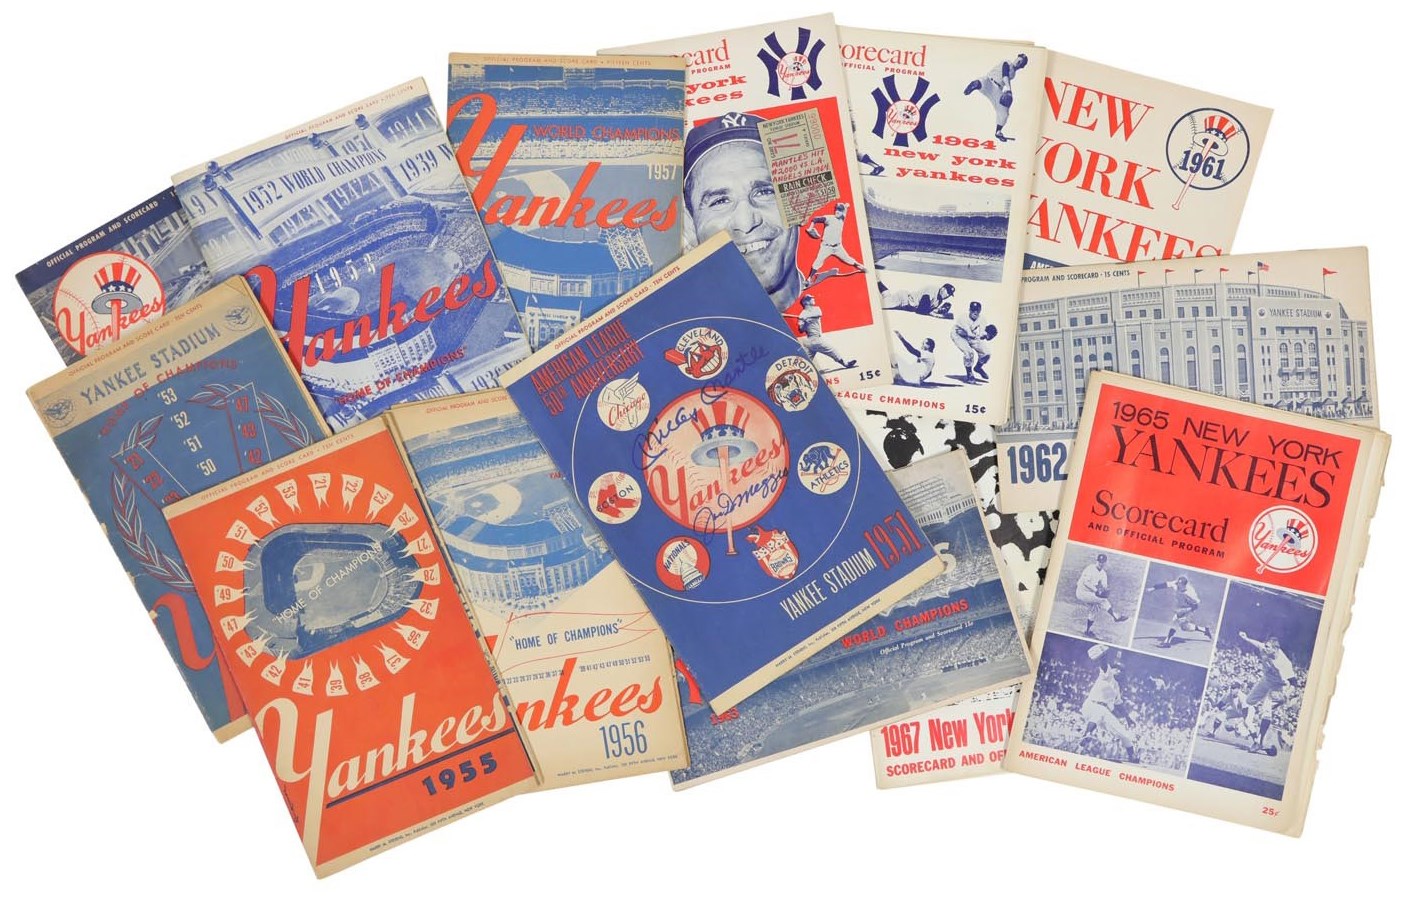 Kubina And The Mick - 1950s-60s New York Yankees Program, Ticket & Scorecard Collection w/1951 Mantle & DiMaggio Signed (30+)